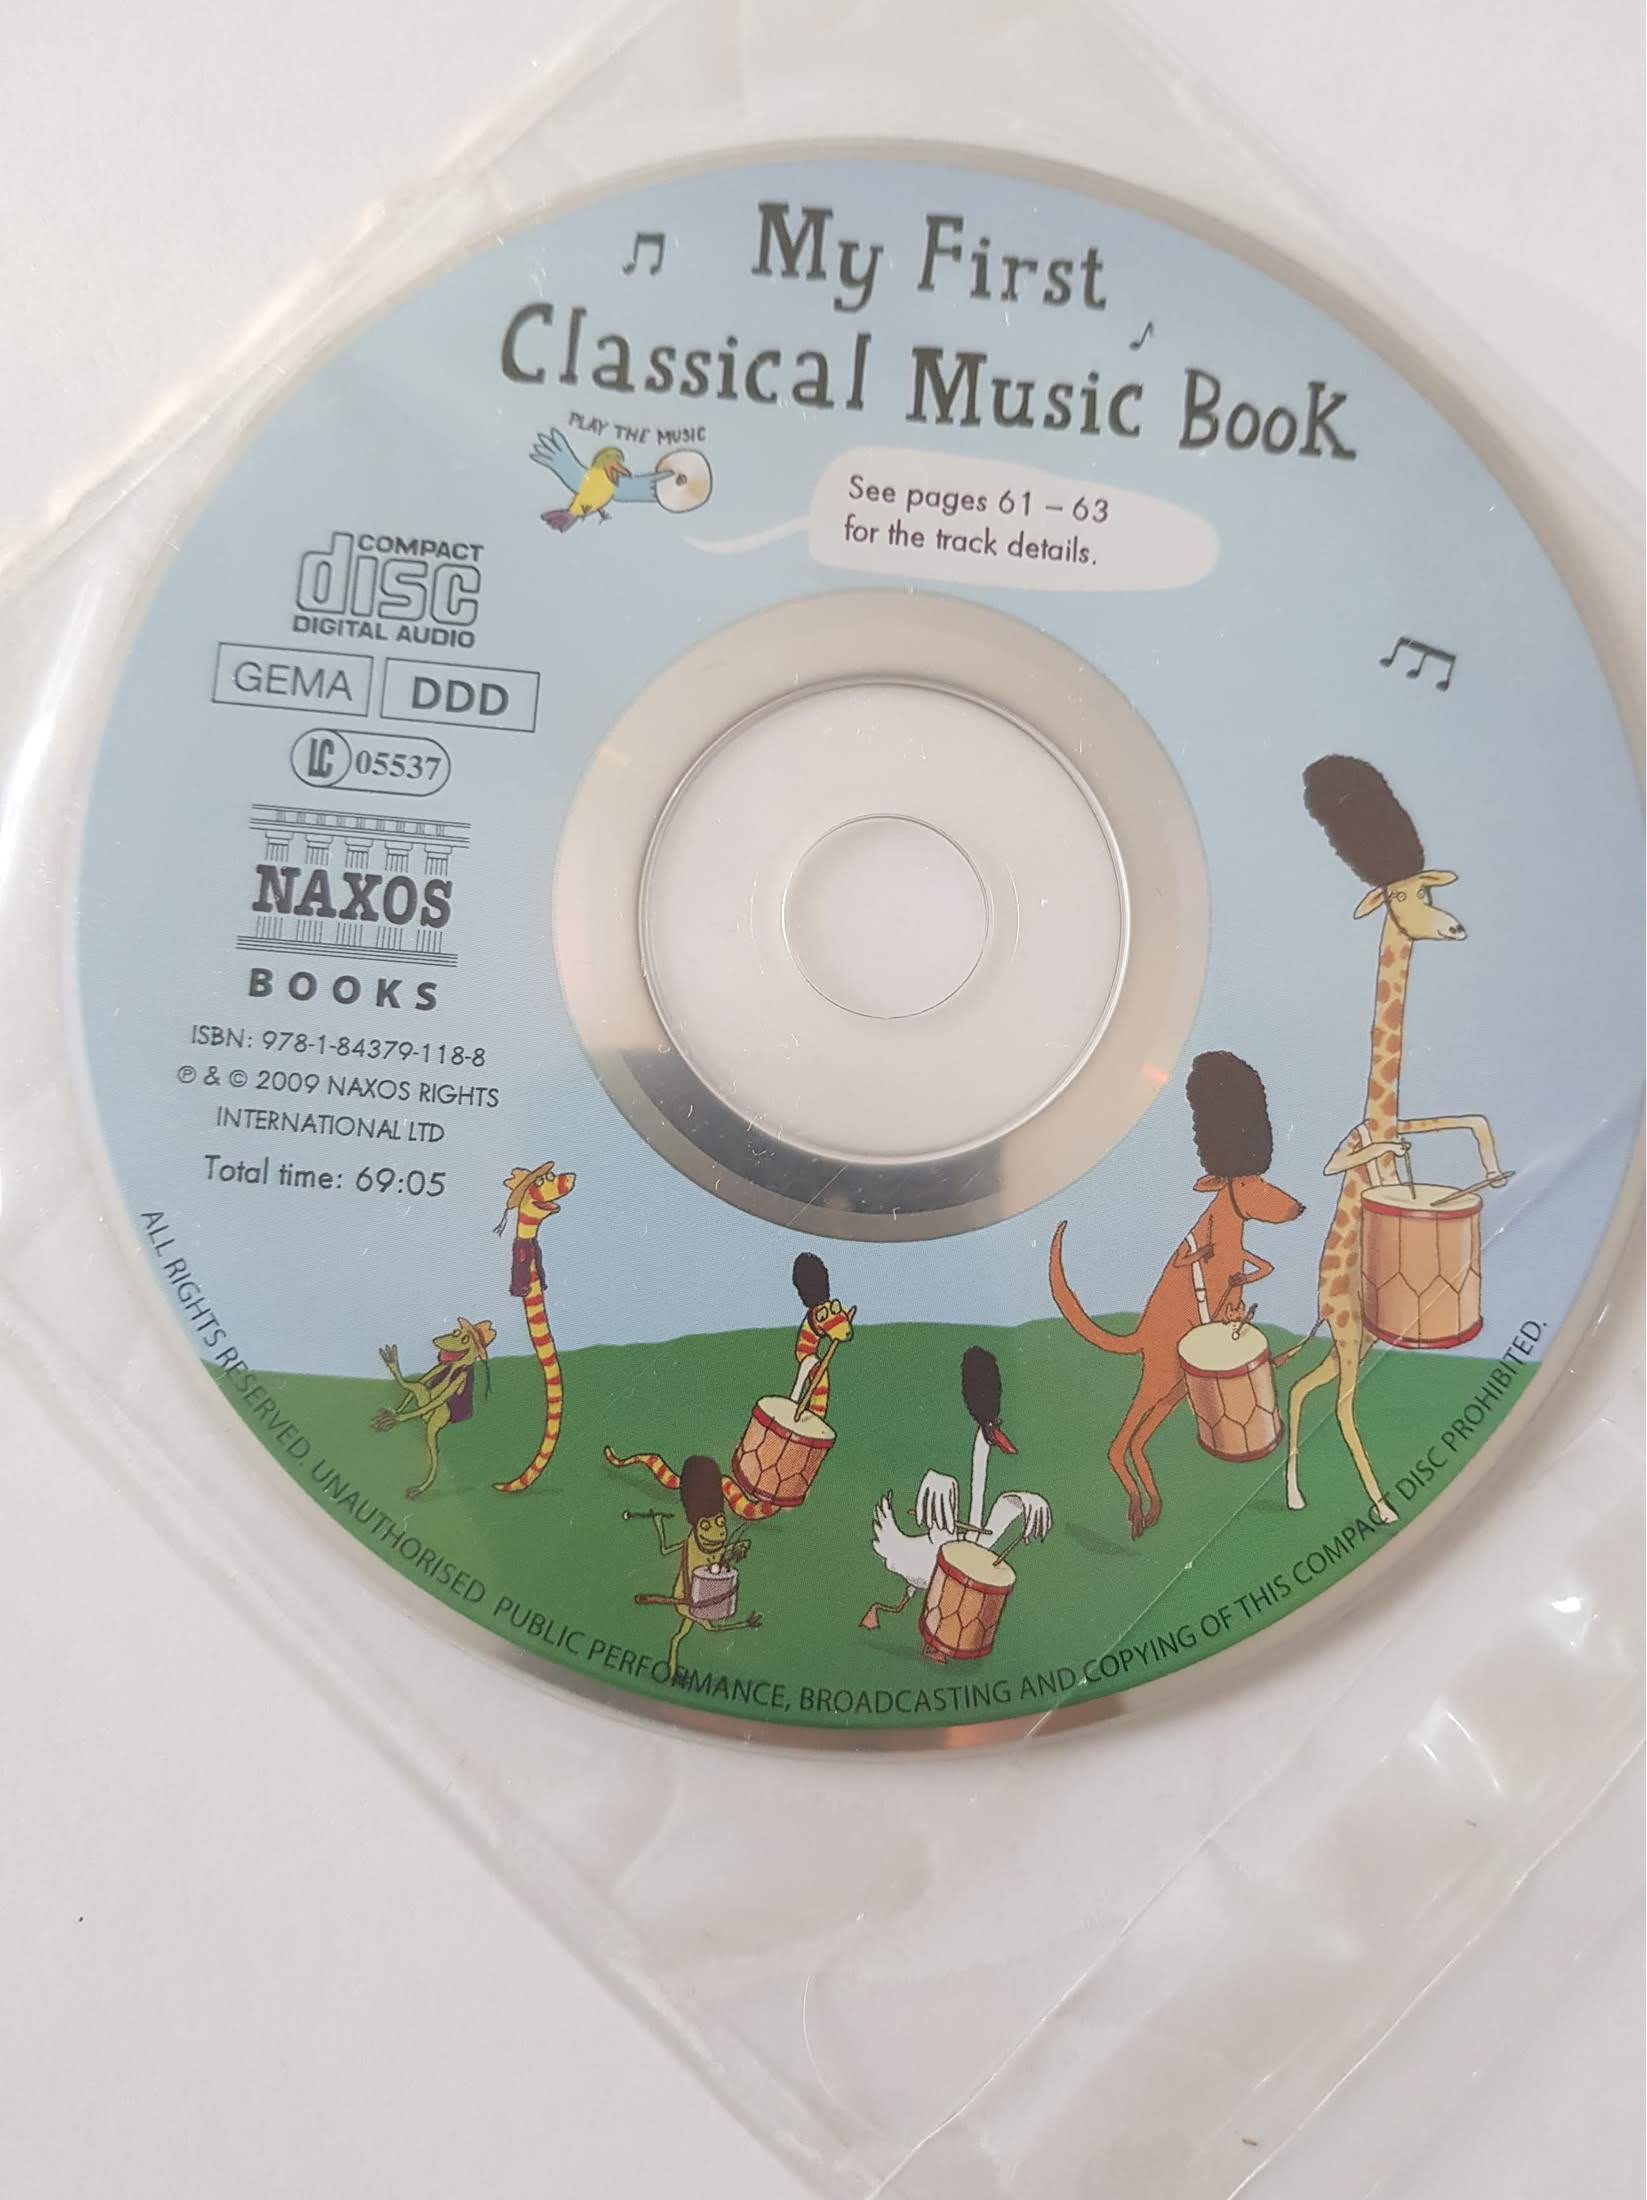 My First Classical Music Book Like New Recuddles.ch  (6231271899321)